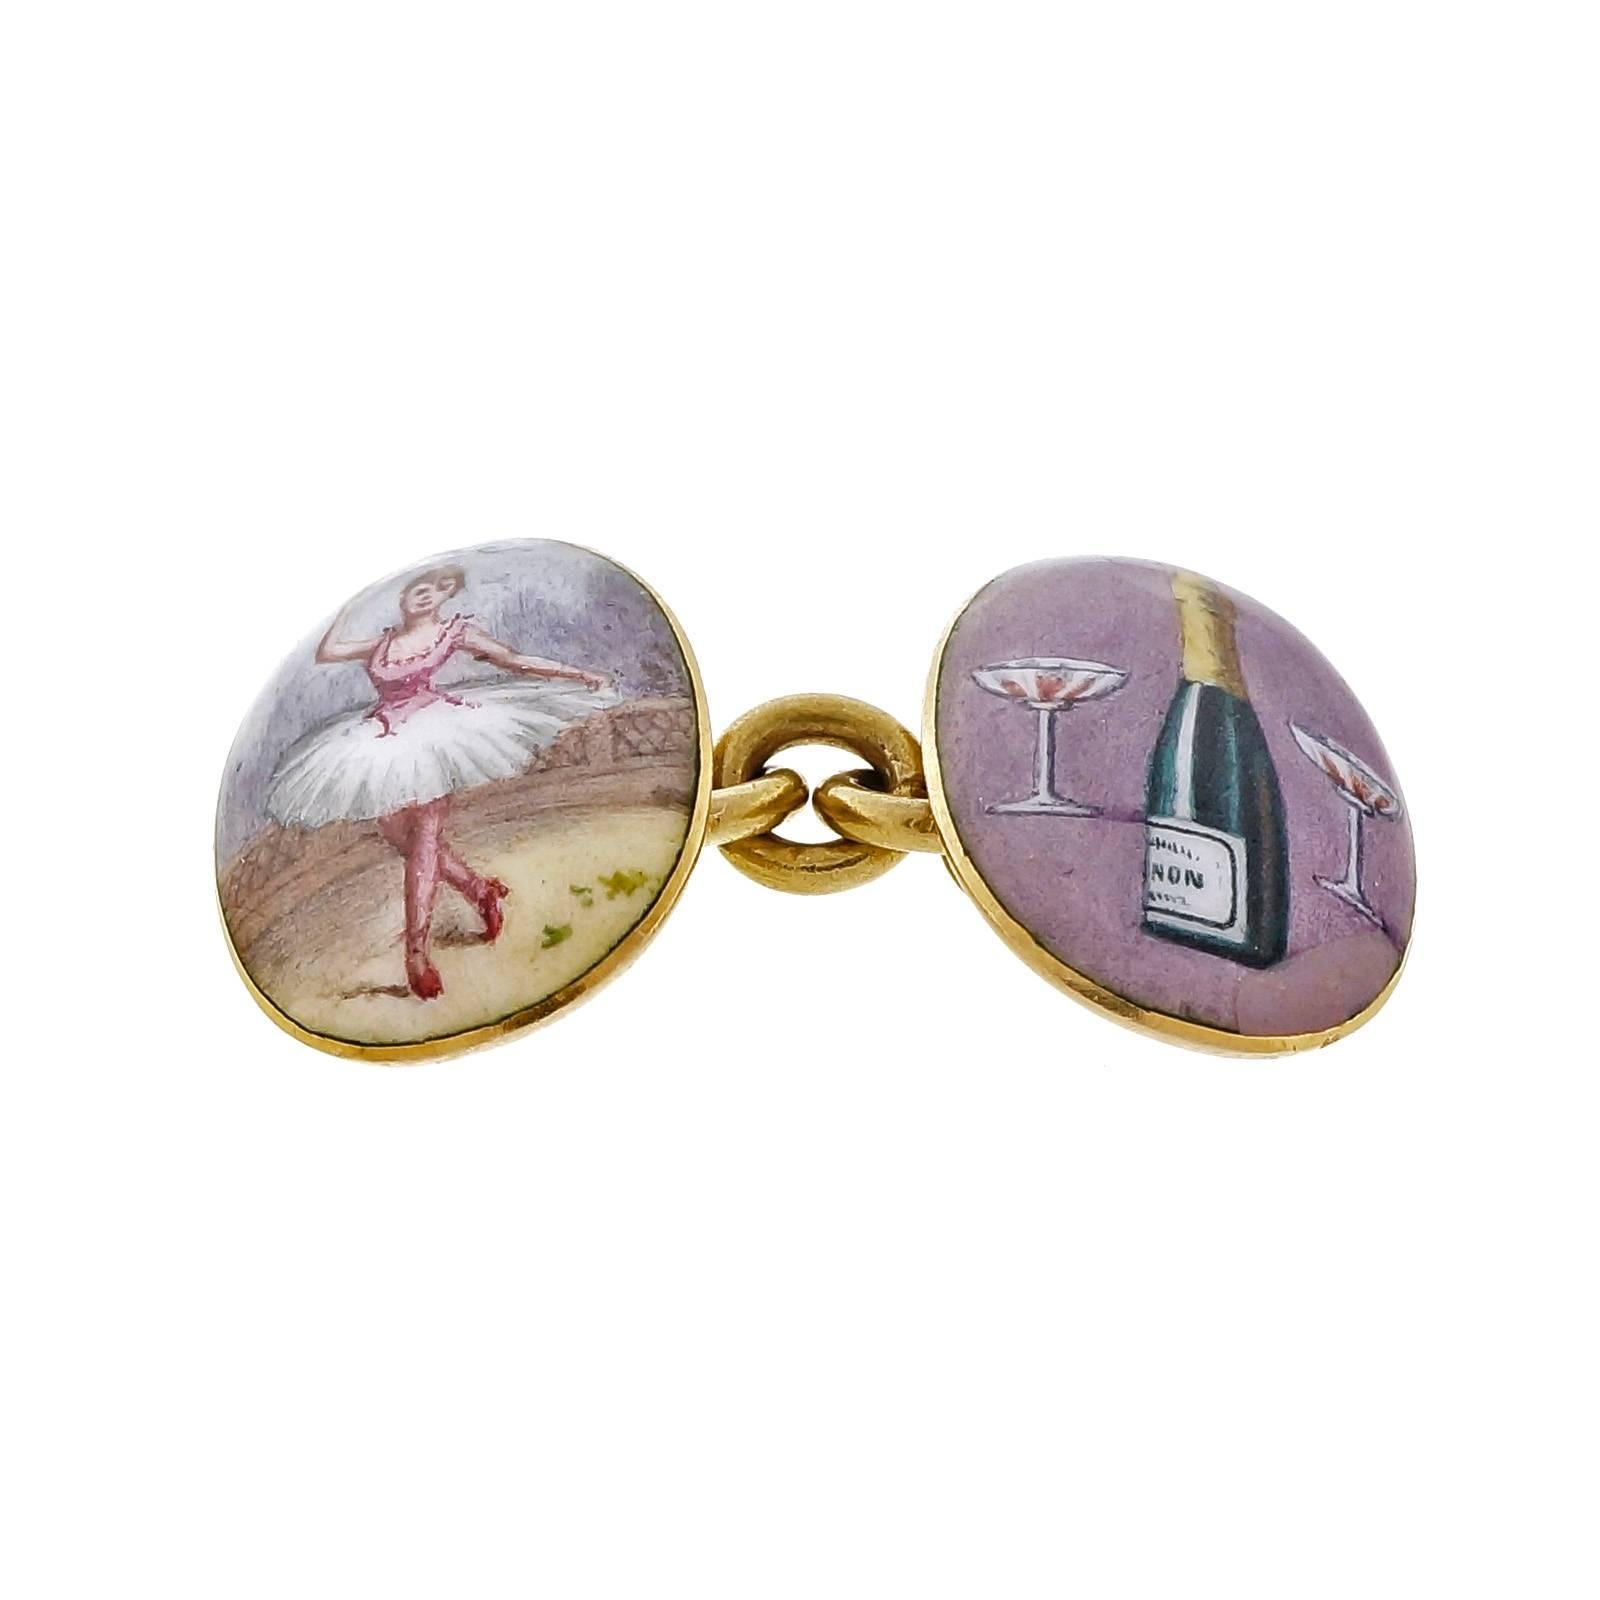 1900’s double sided enamel cuff links. A ballerina and champagne bottle on one and a deck of cards and a race horse on the other. Enamel very good overall. One very small scratch on the card deck. Natural patina.

18k yellow gold
Tested and stamped: